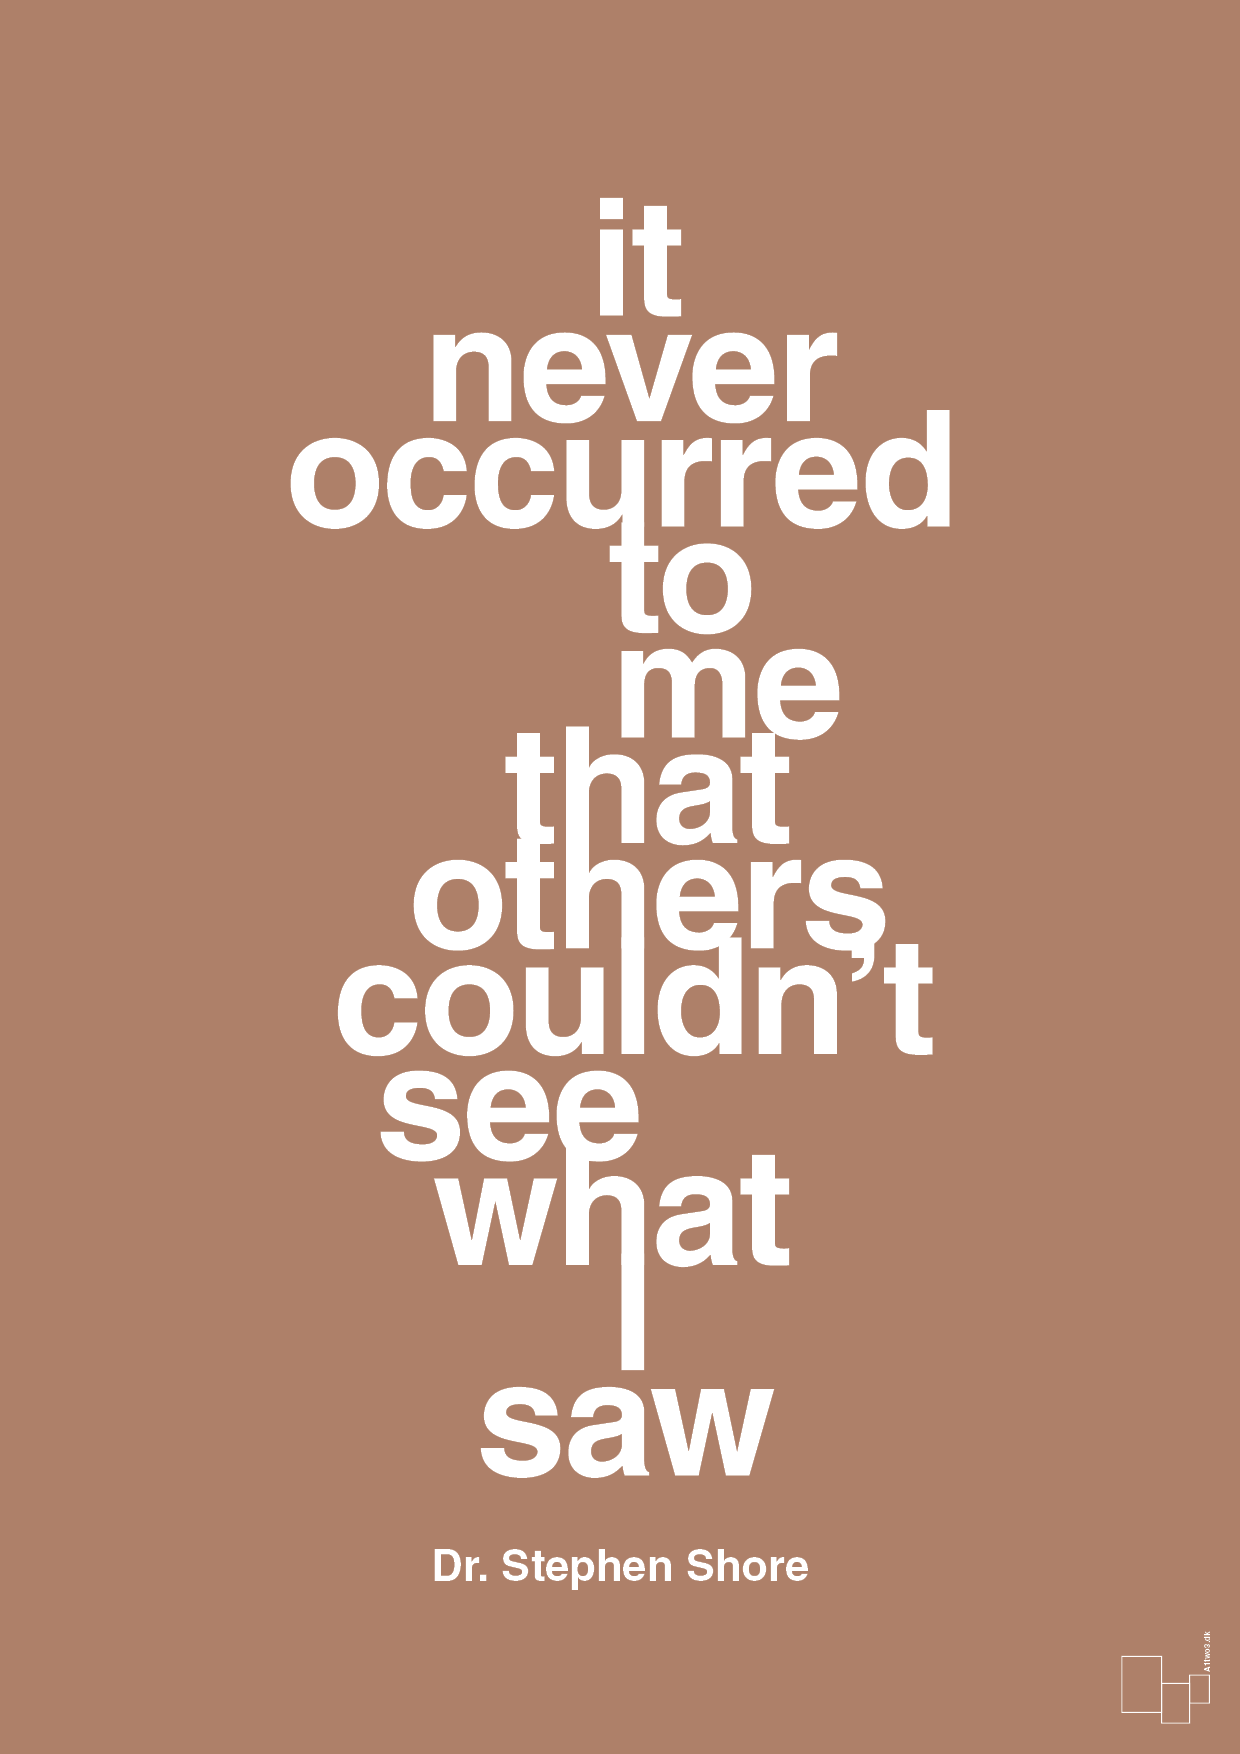 it never occurred to me that others couldn’t see what I saw - Plakat med Samfund i Cider Spice